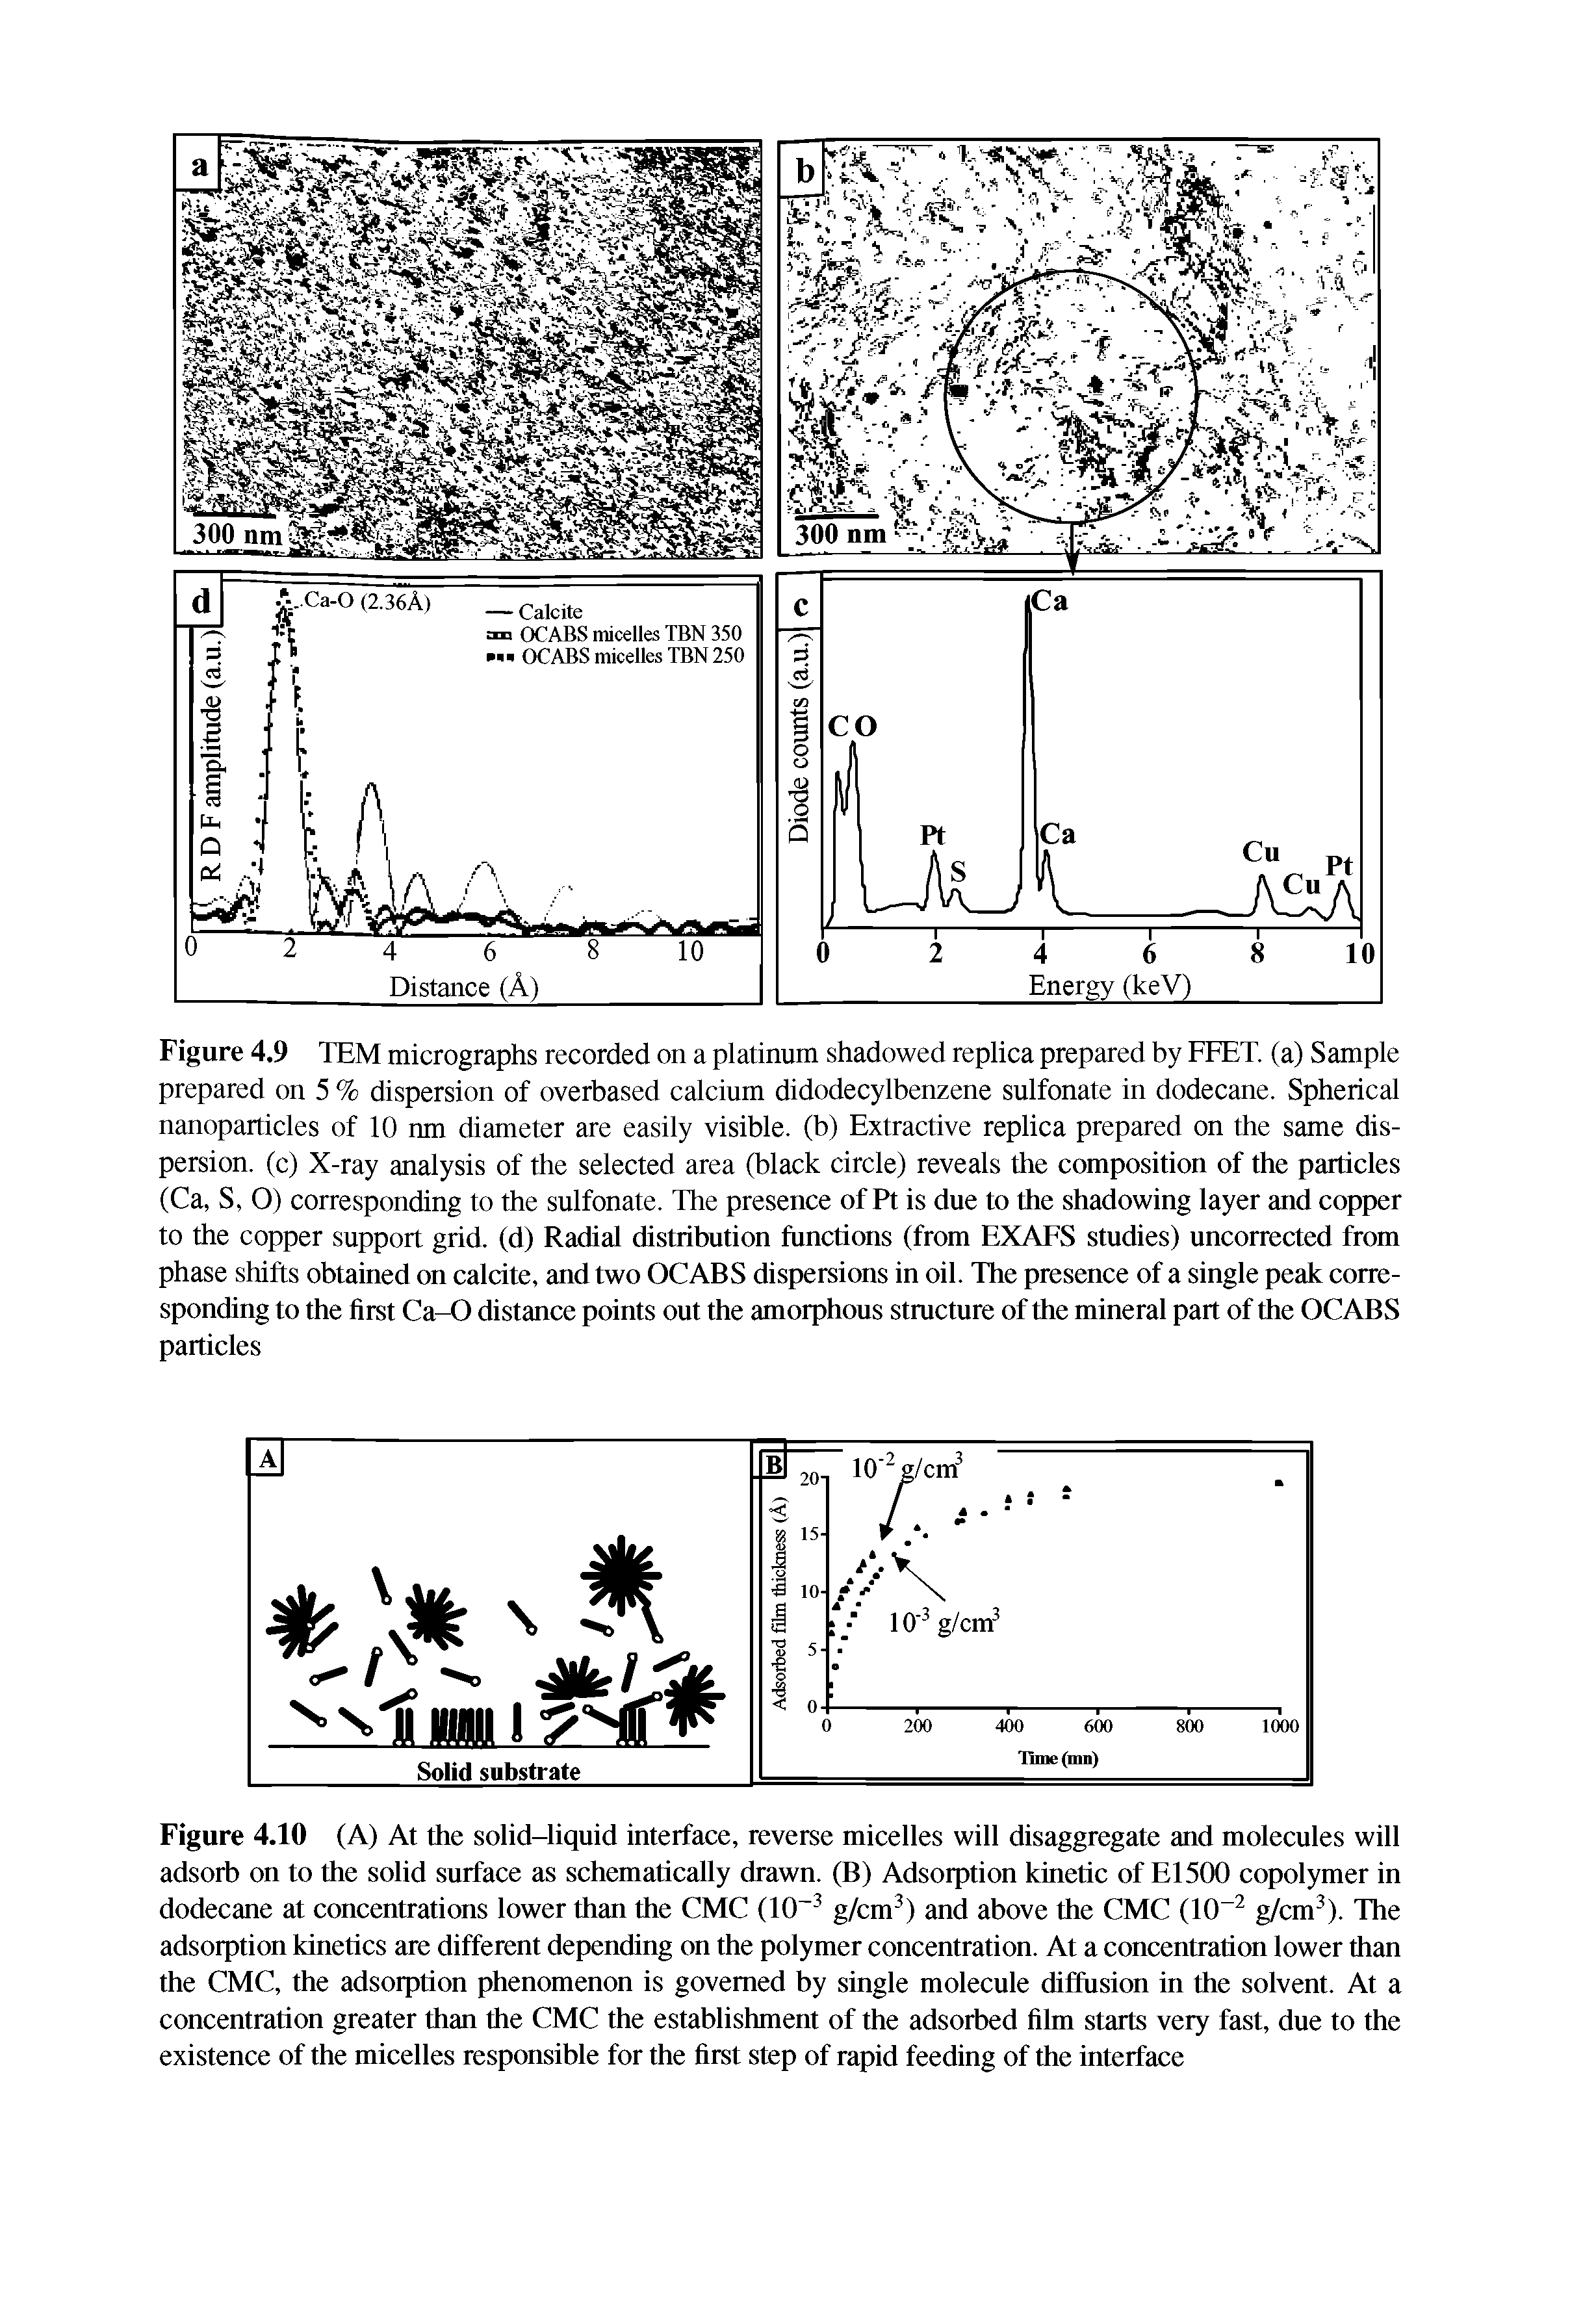 Figure 4.9 TEM micrographs recorded on a platinum shadowed replica prepared by FFET. (a) Sample prepared on 5 % dispersion of overbased calcium didodecylbenzene sulfonate in dodecane. Spherical nanoparticles of 10 nm diameter are easily visible, (b) Extractive replica prepared on the same dispersion. (c) X-ray analysis of the selected area (black circle) reveals the composition of the particles (Ca, S, O) corresponding to the sulfonate. The presence of Pt is due to the shadowing layer and copper to the copper support grid, (d) Radial distribution functions (from EXAFS studies) uncorrected from phase shifts obtained on caldte, and two OCABS dispersions in oil. The presence of a single peak corresponding to the first Ca-0 distance points out the amorphous structure of the mineral part of the OCABS particles...